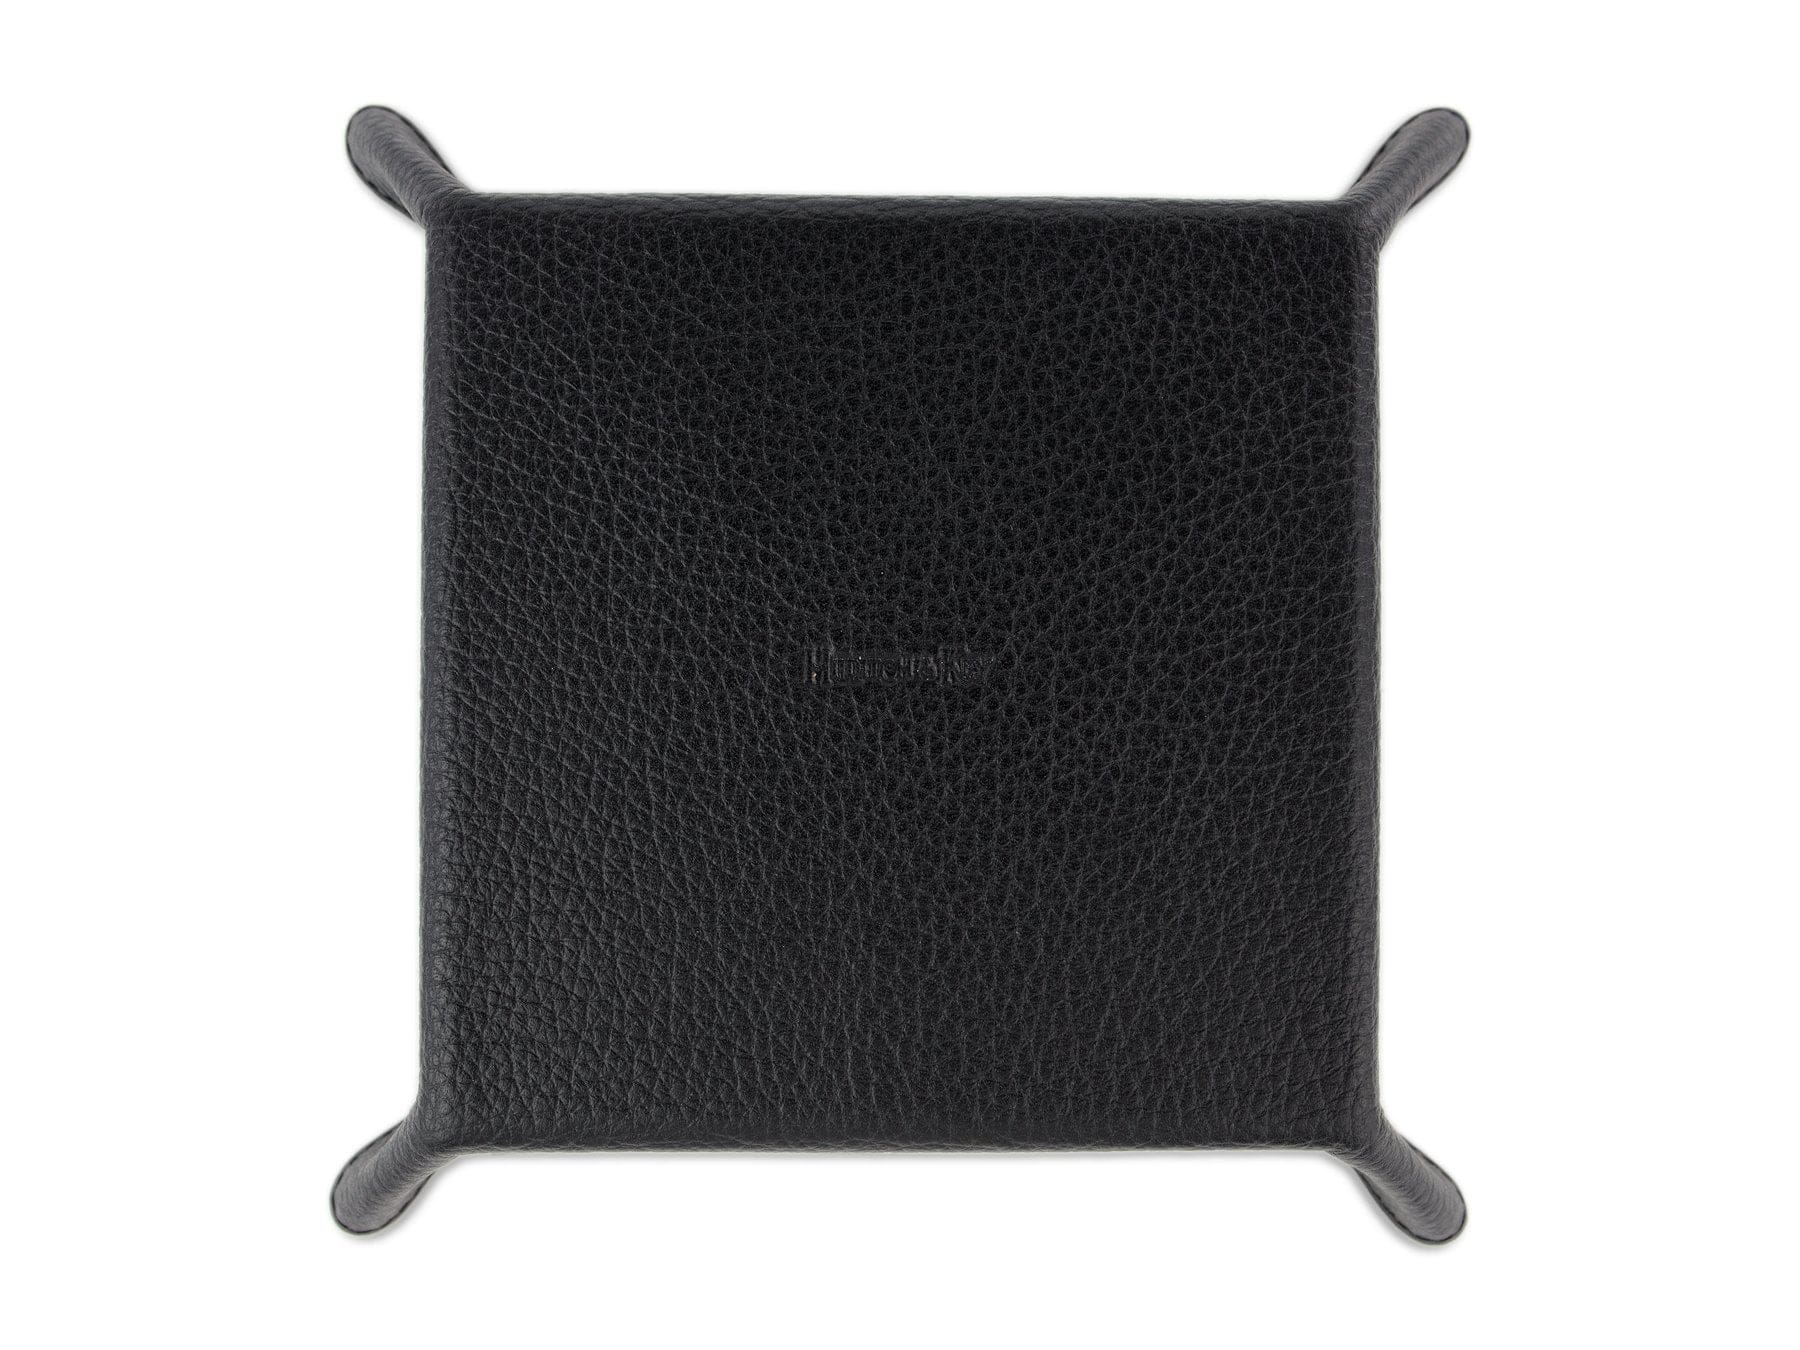 Black Calf Leather with Red Suede Travel Tray - Hilditch & Key